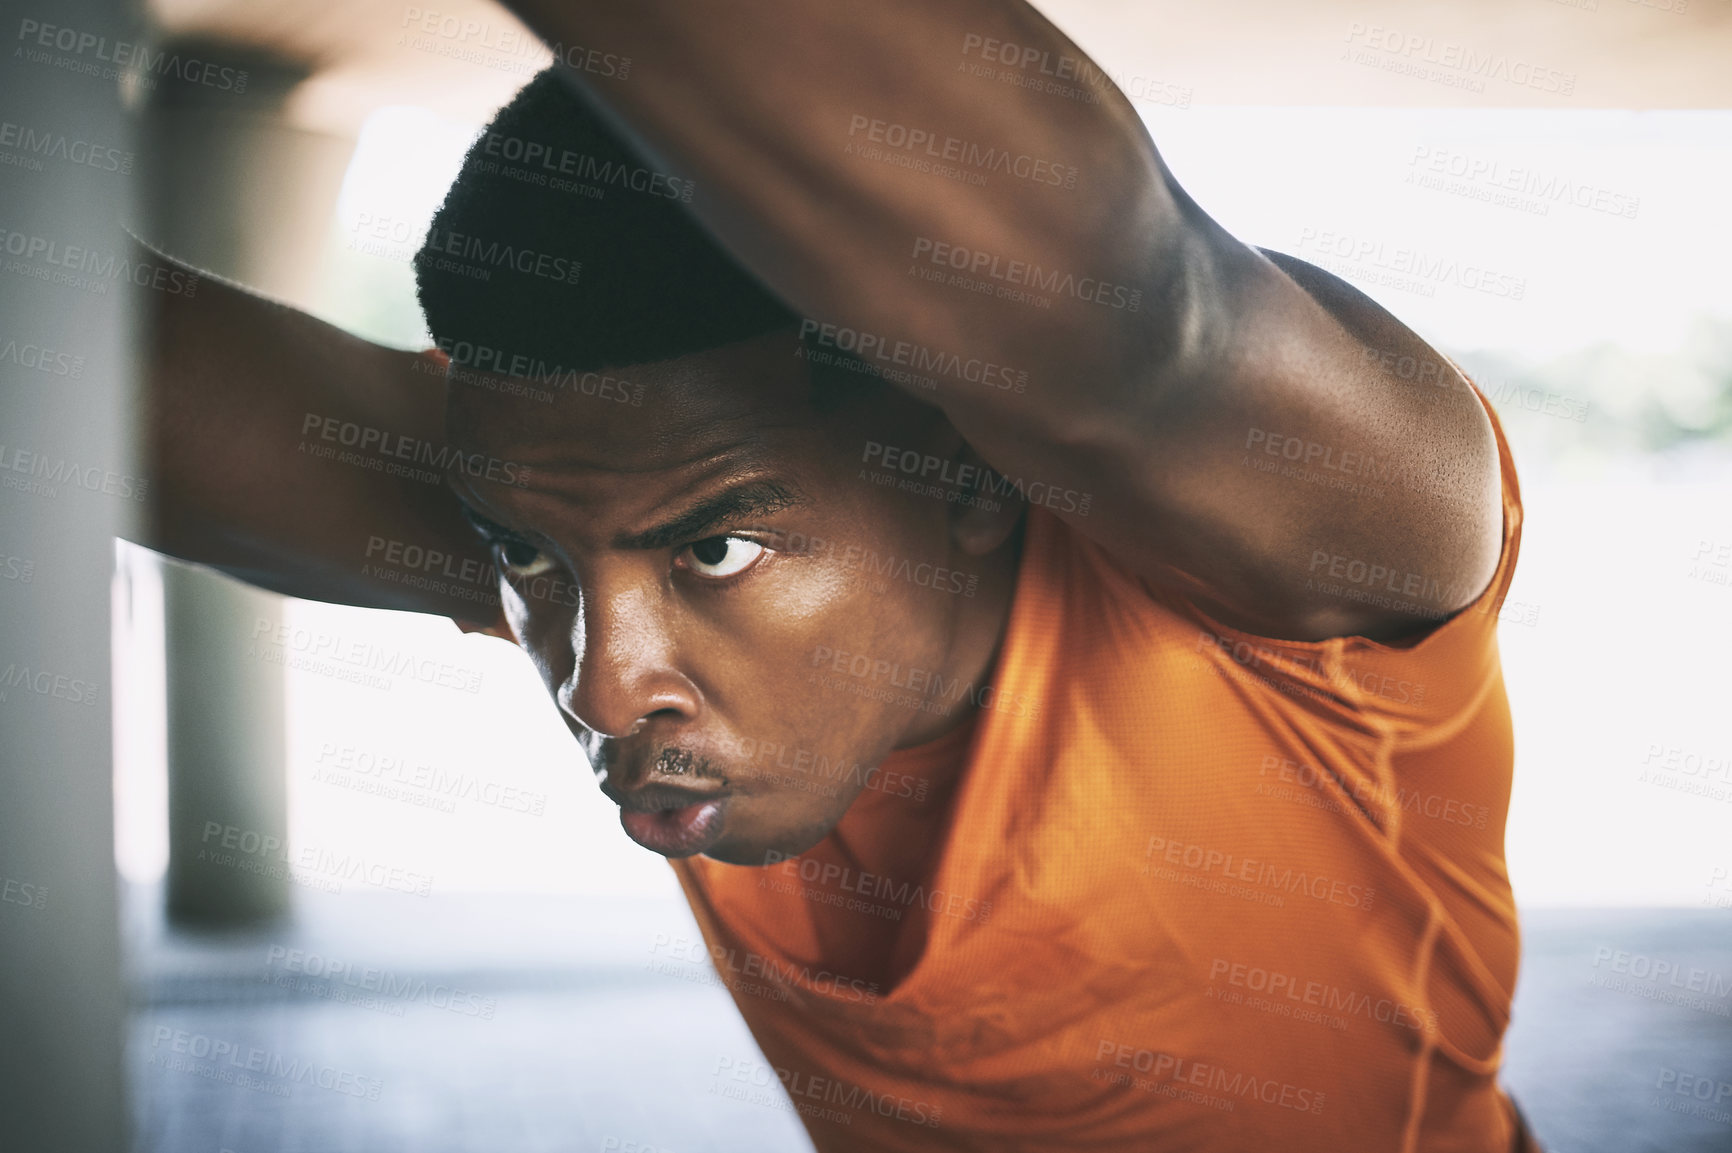 Buy stock photo Shot of a young man stretching during a workout against an urban background